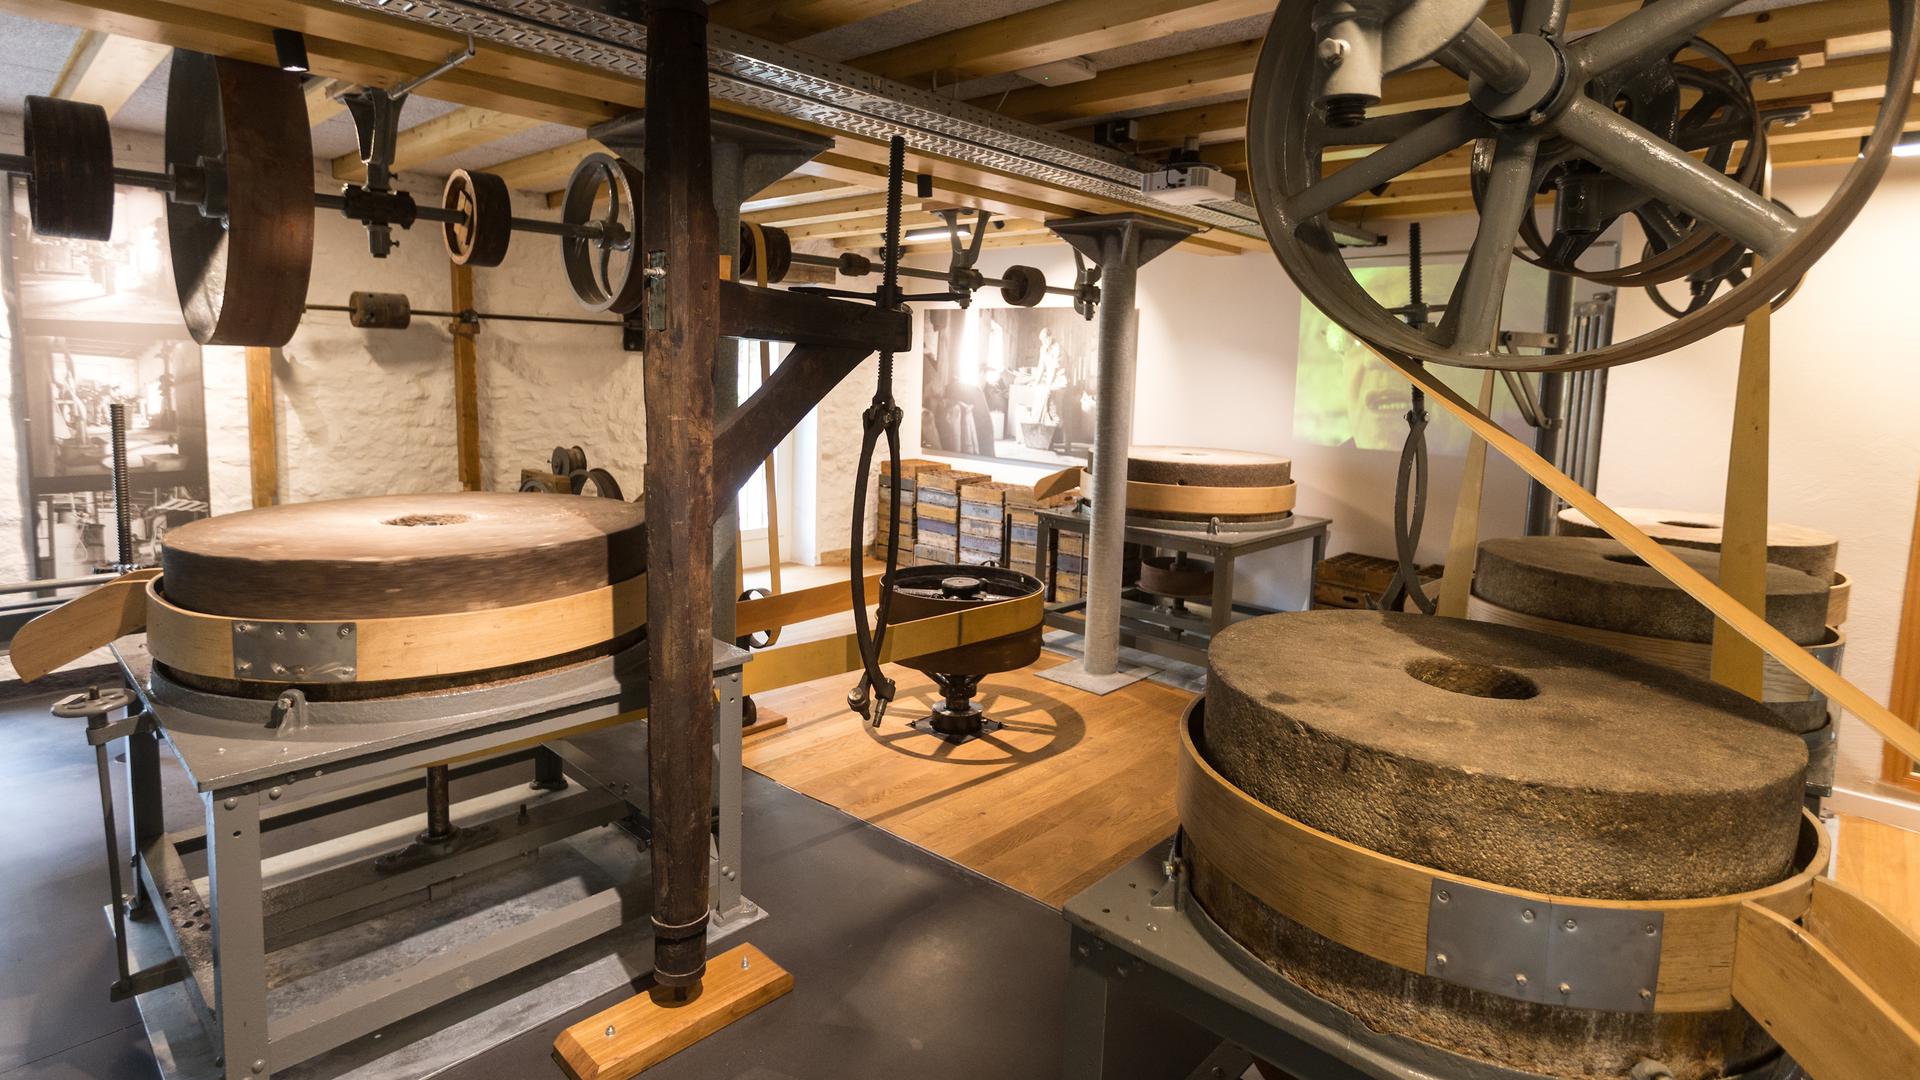 Take a tour of the historic mustard mill, powered by the River Alzette